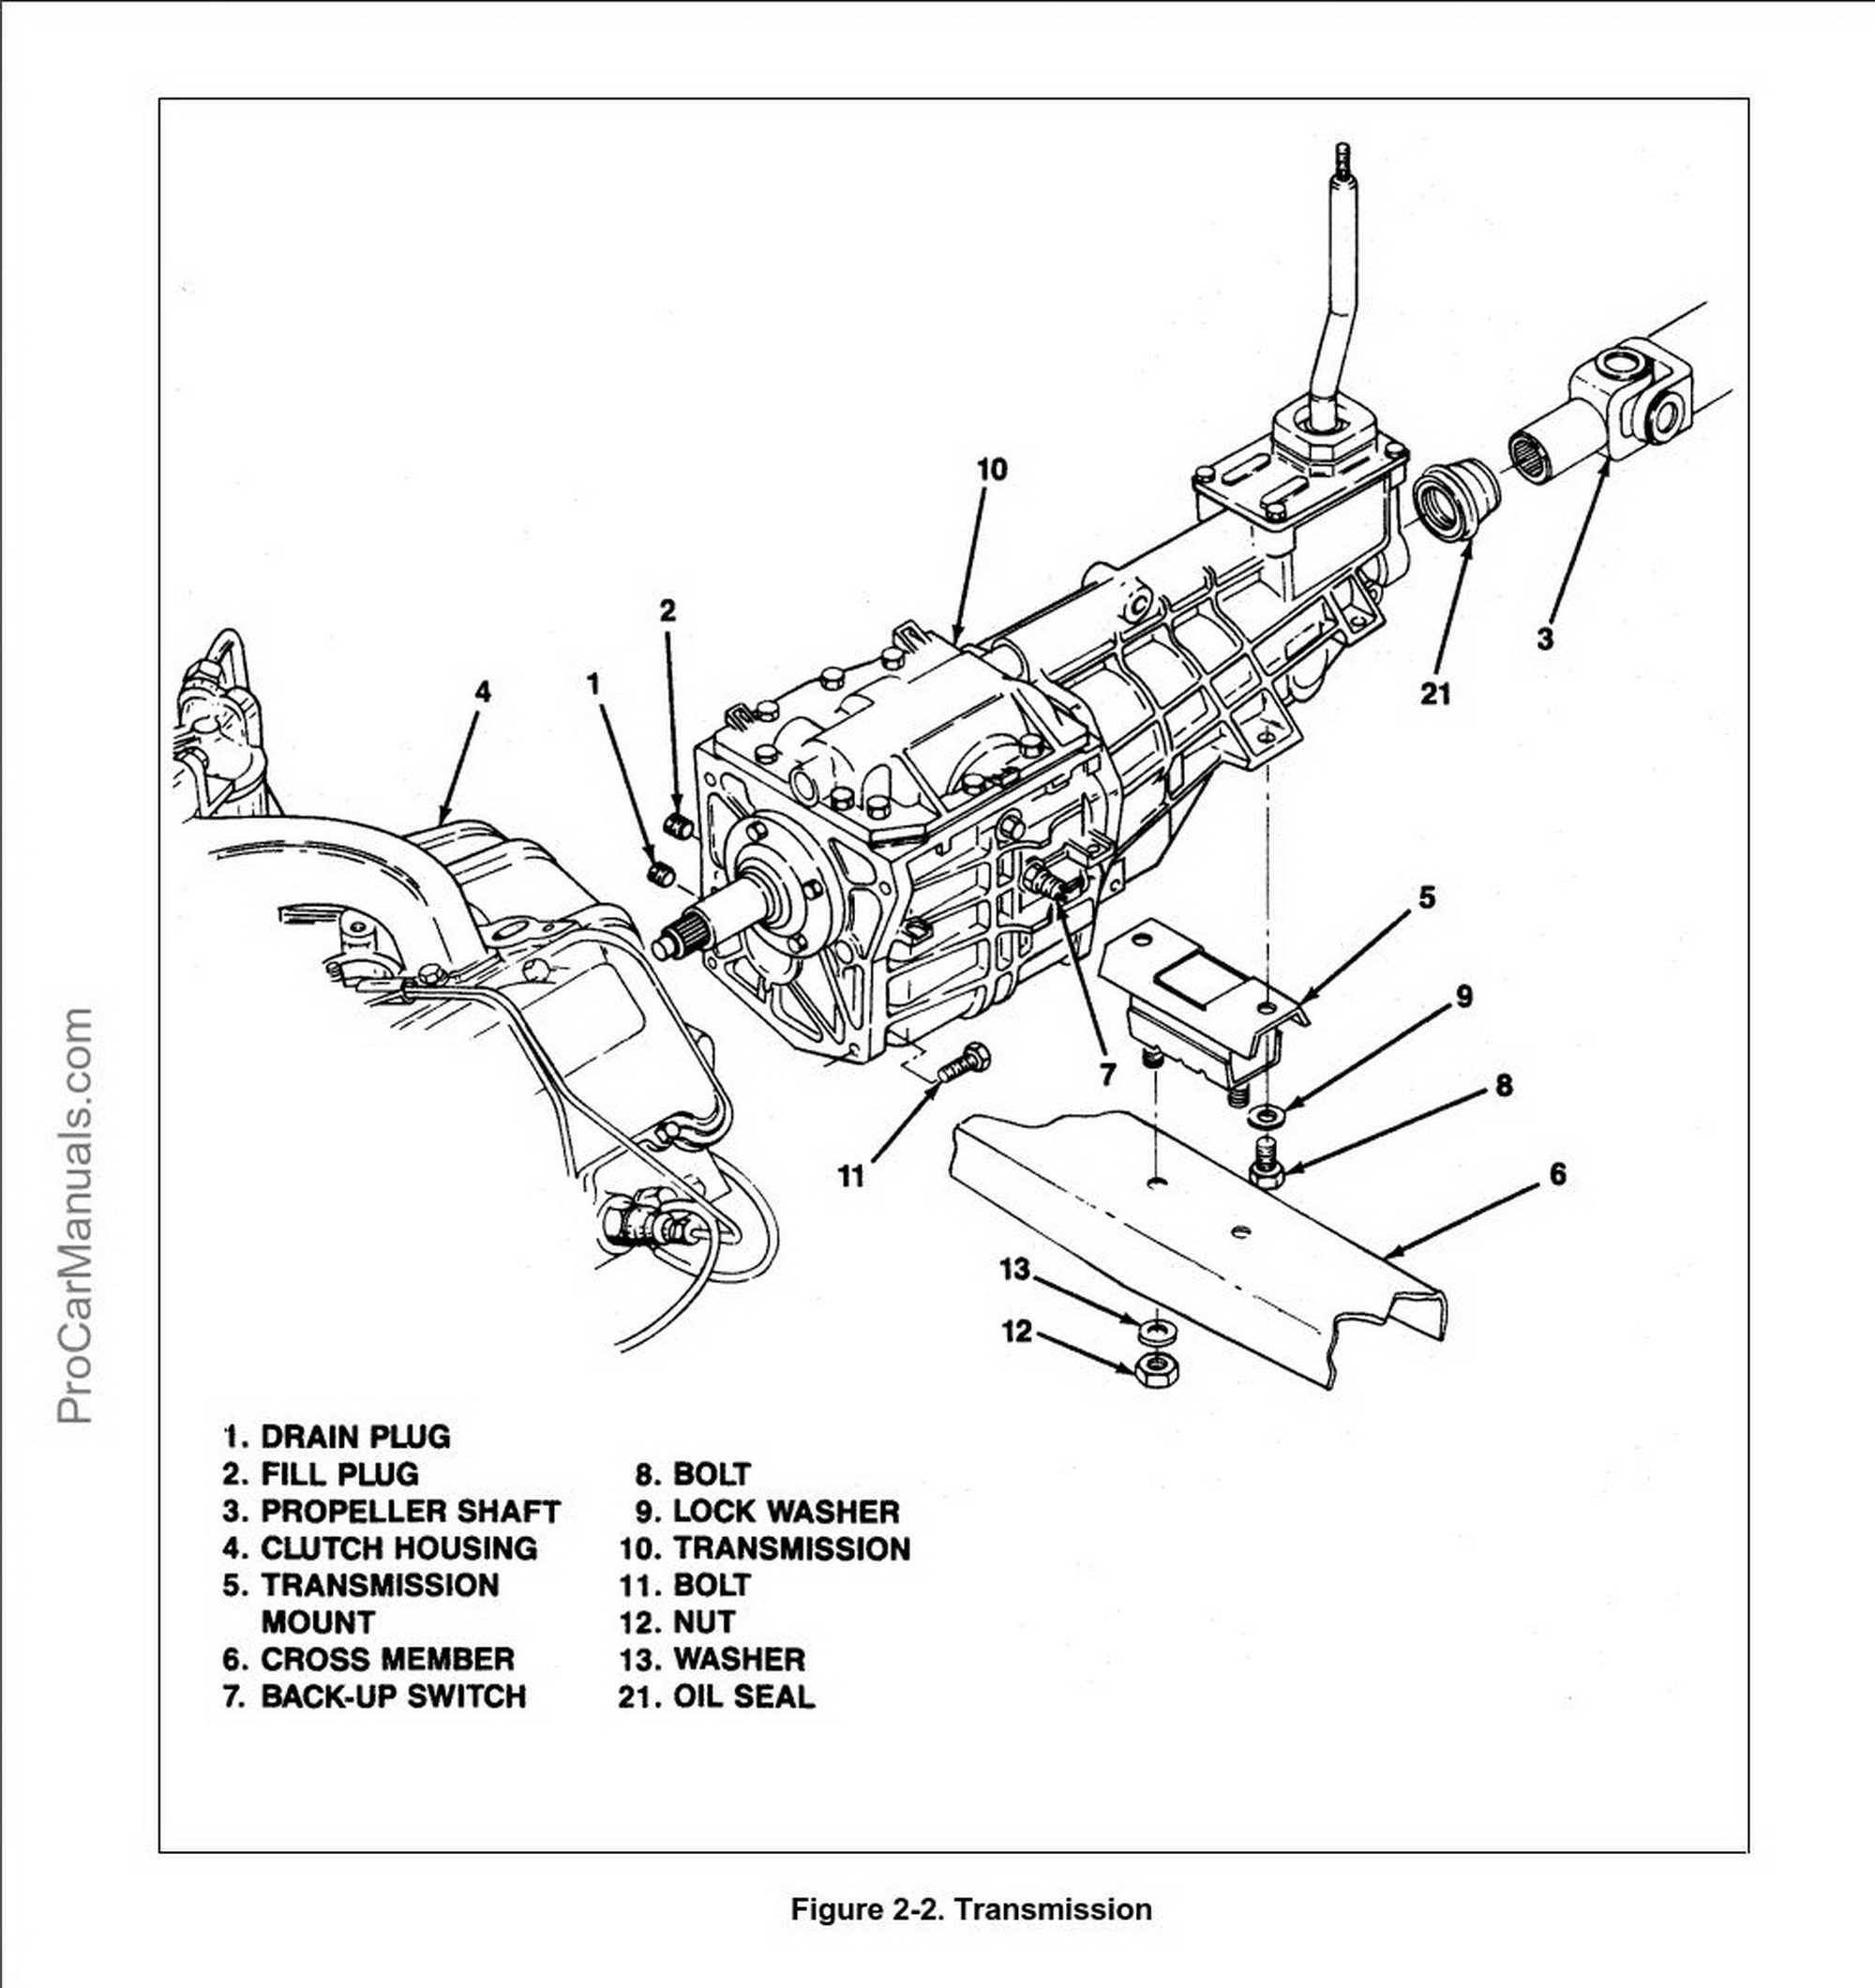 T5 WC & STD On-Vehicle Service and Troubleshooting - Pdf Online Download